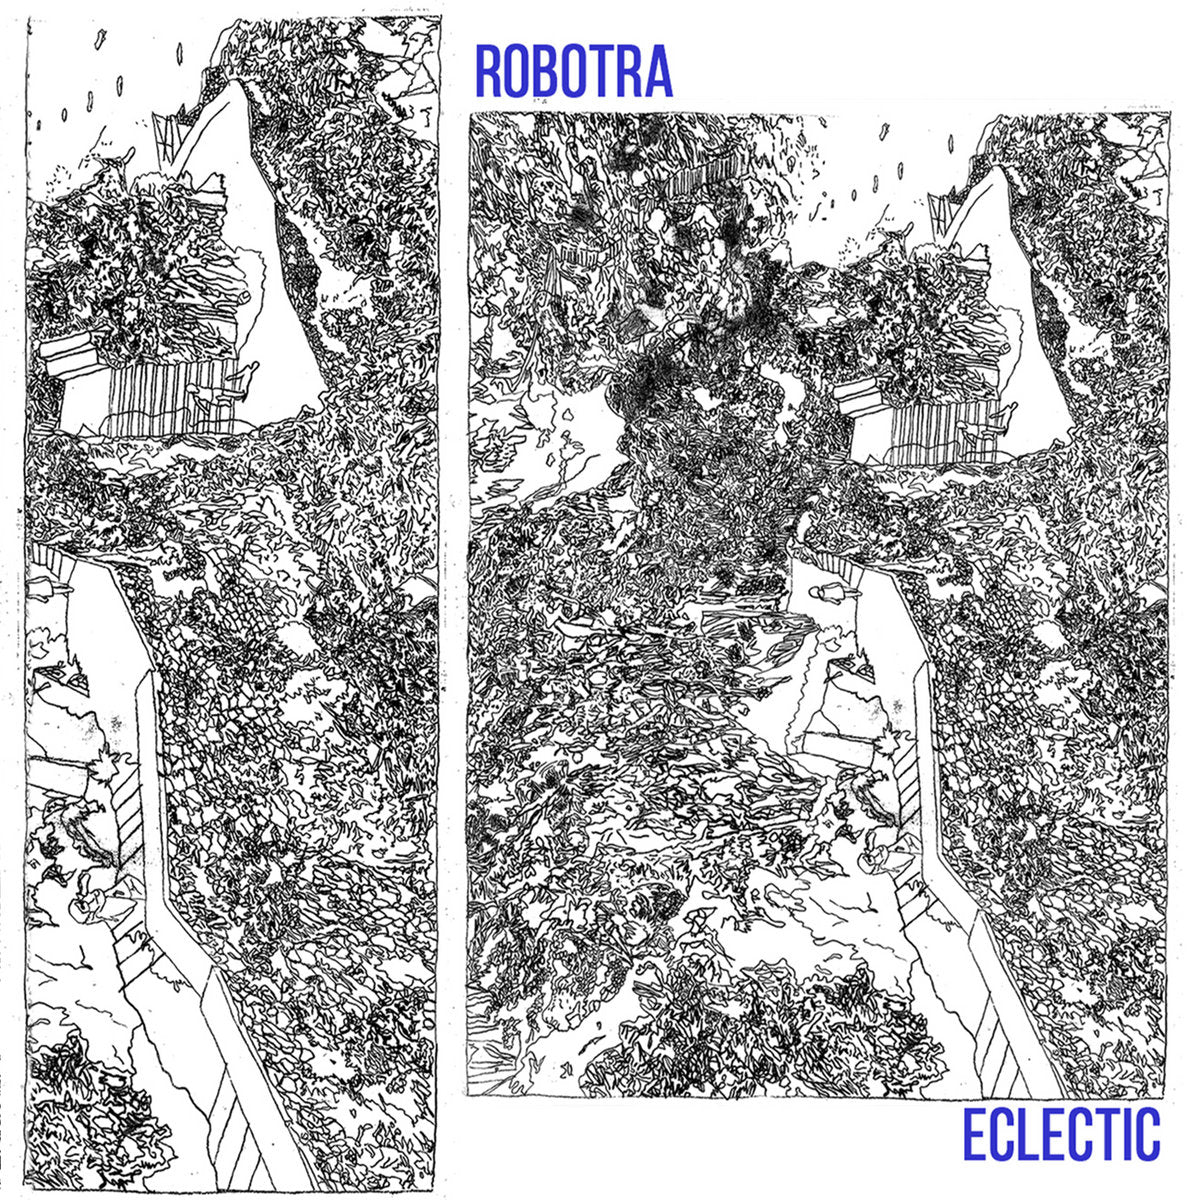 Robotra - Eclectic - Tape